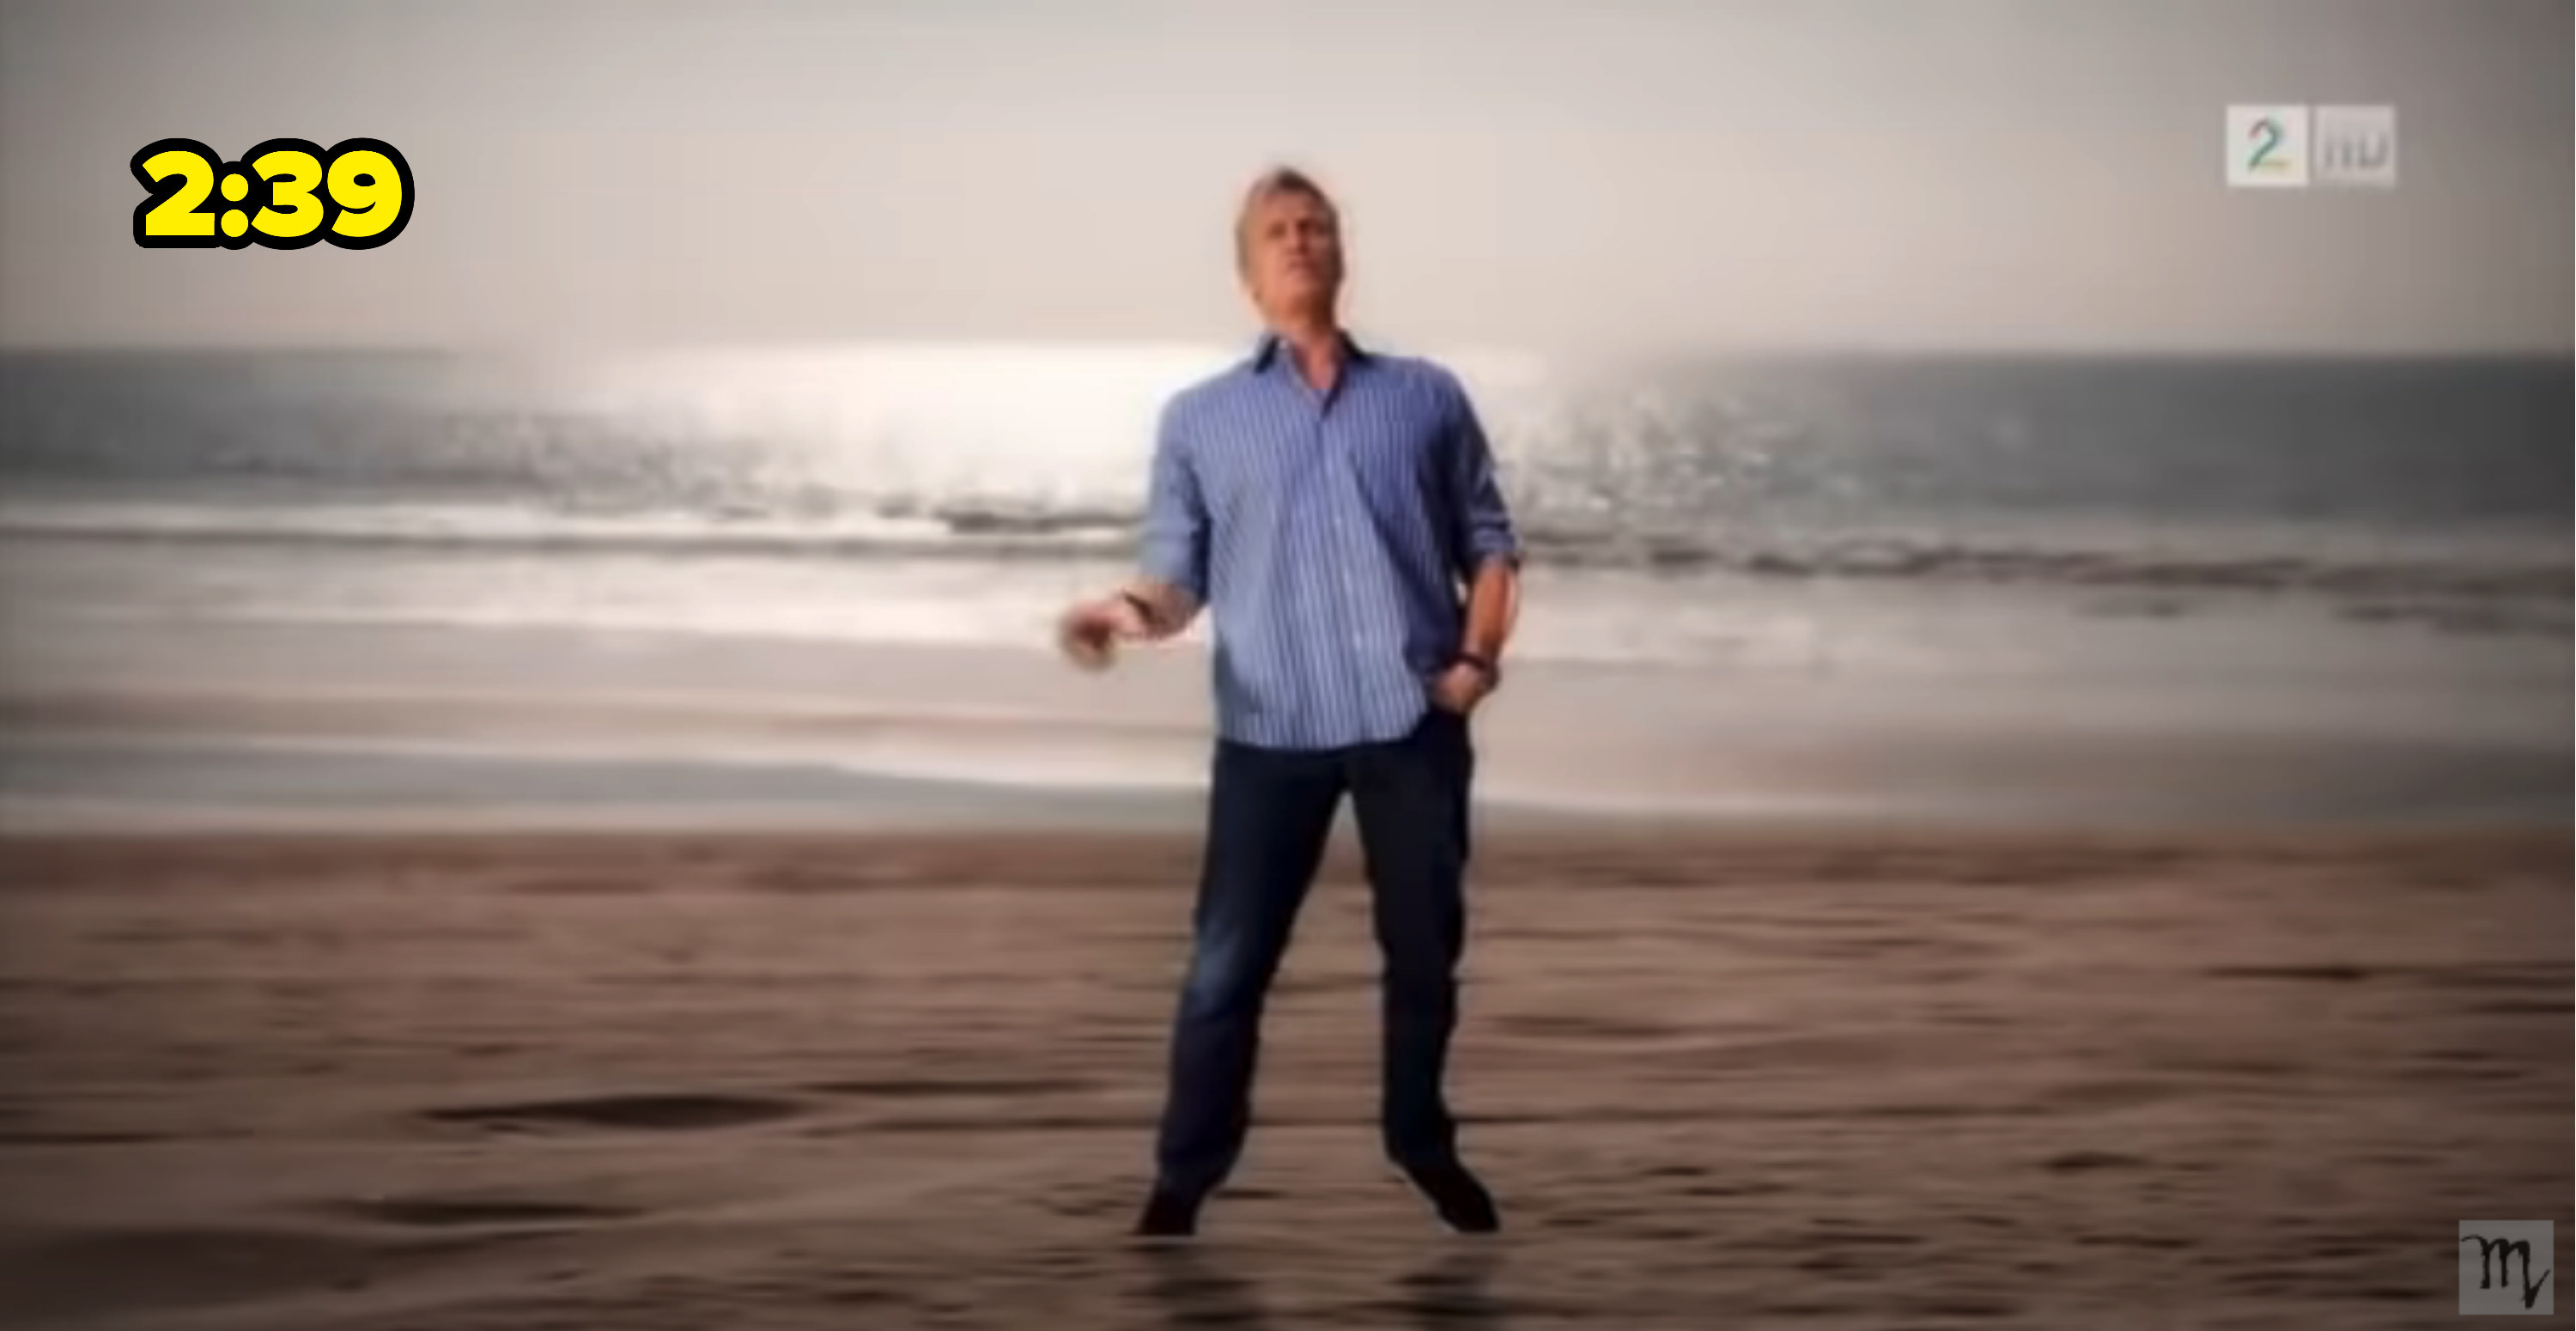 Dolph Lundgren appearing to be floating